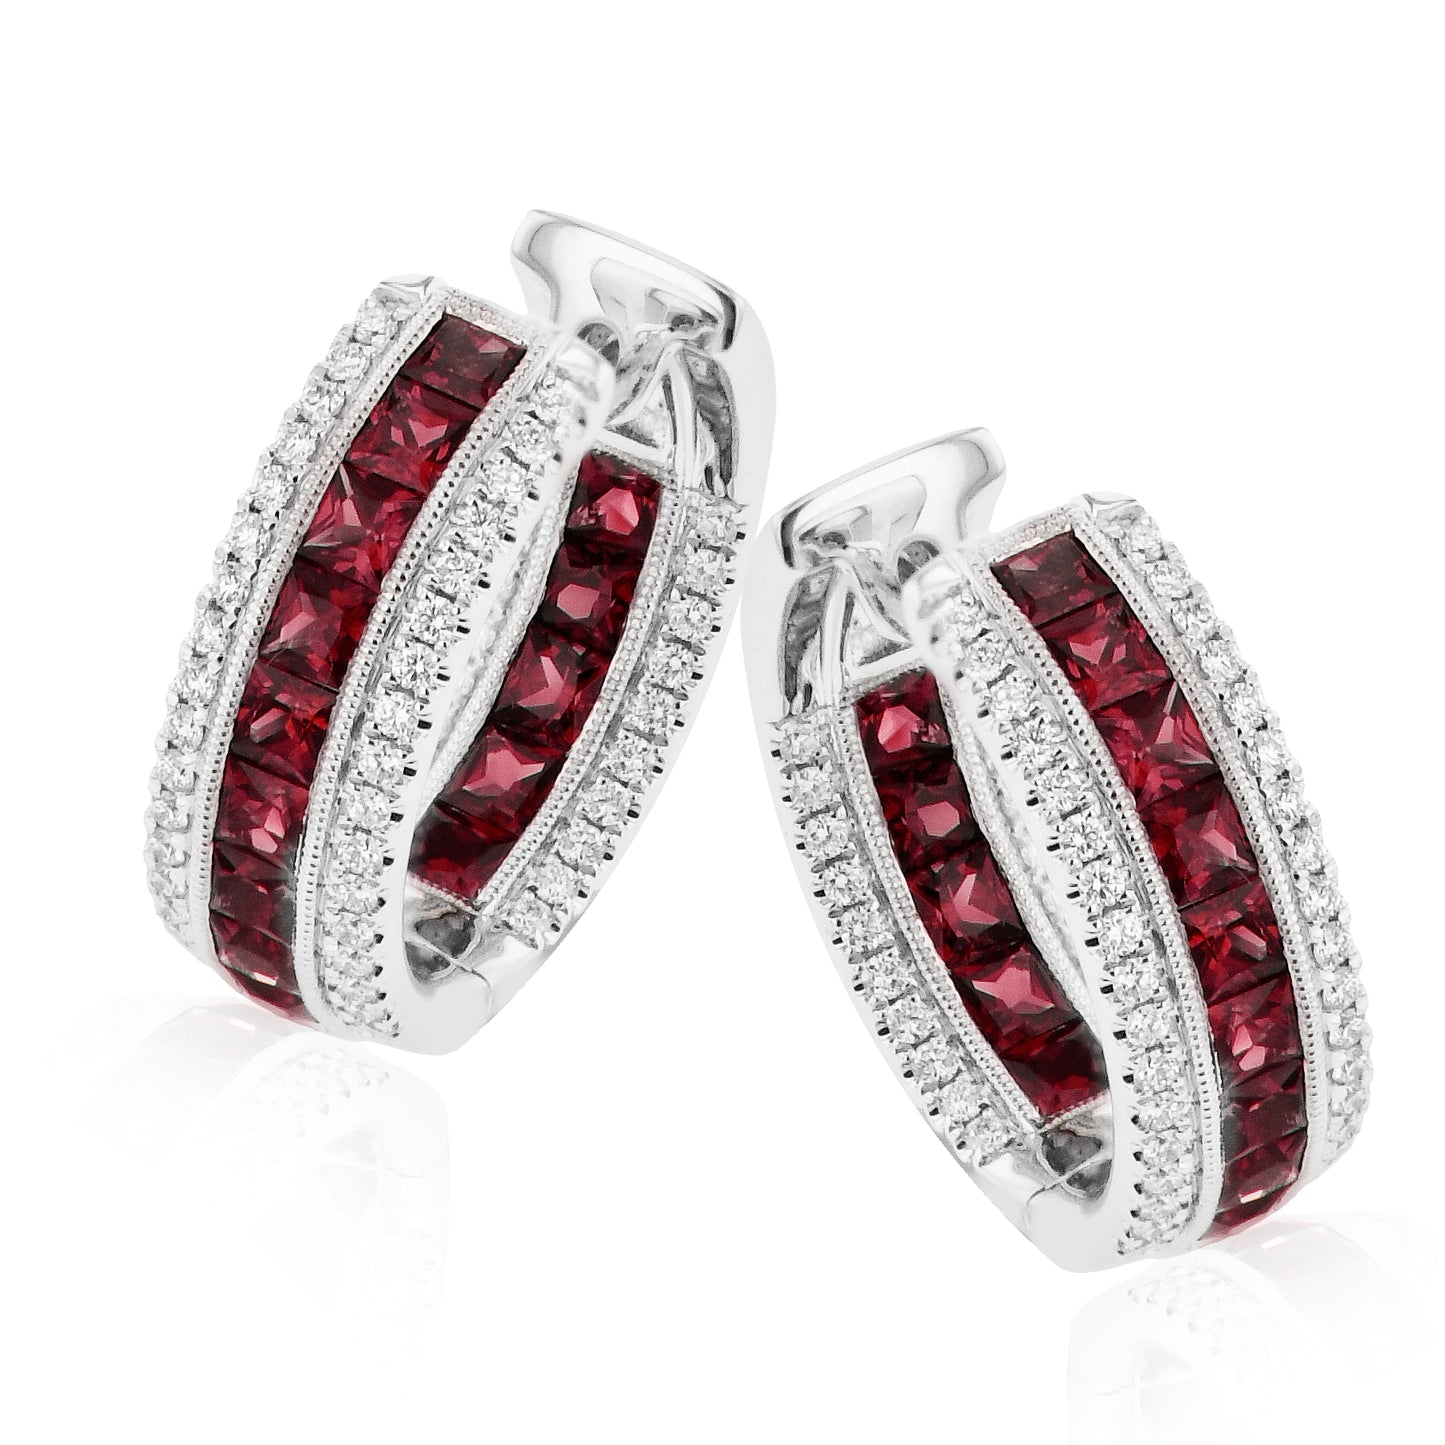 Diamond and Ruby Earrings in 18k White Gold